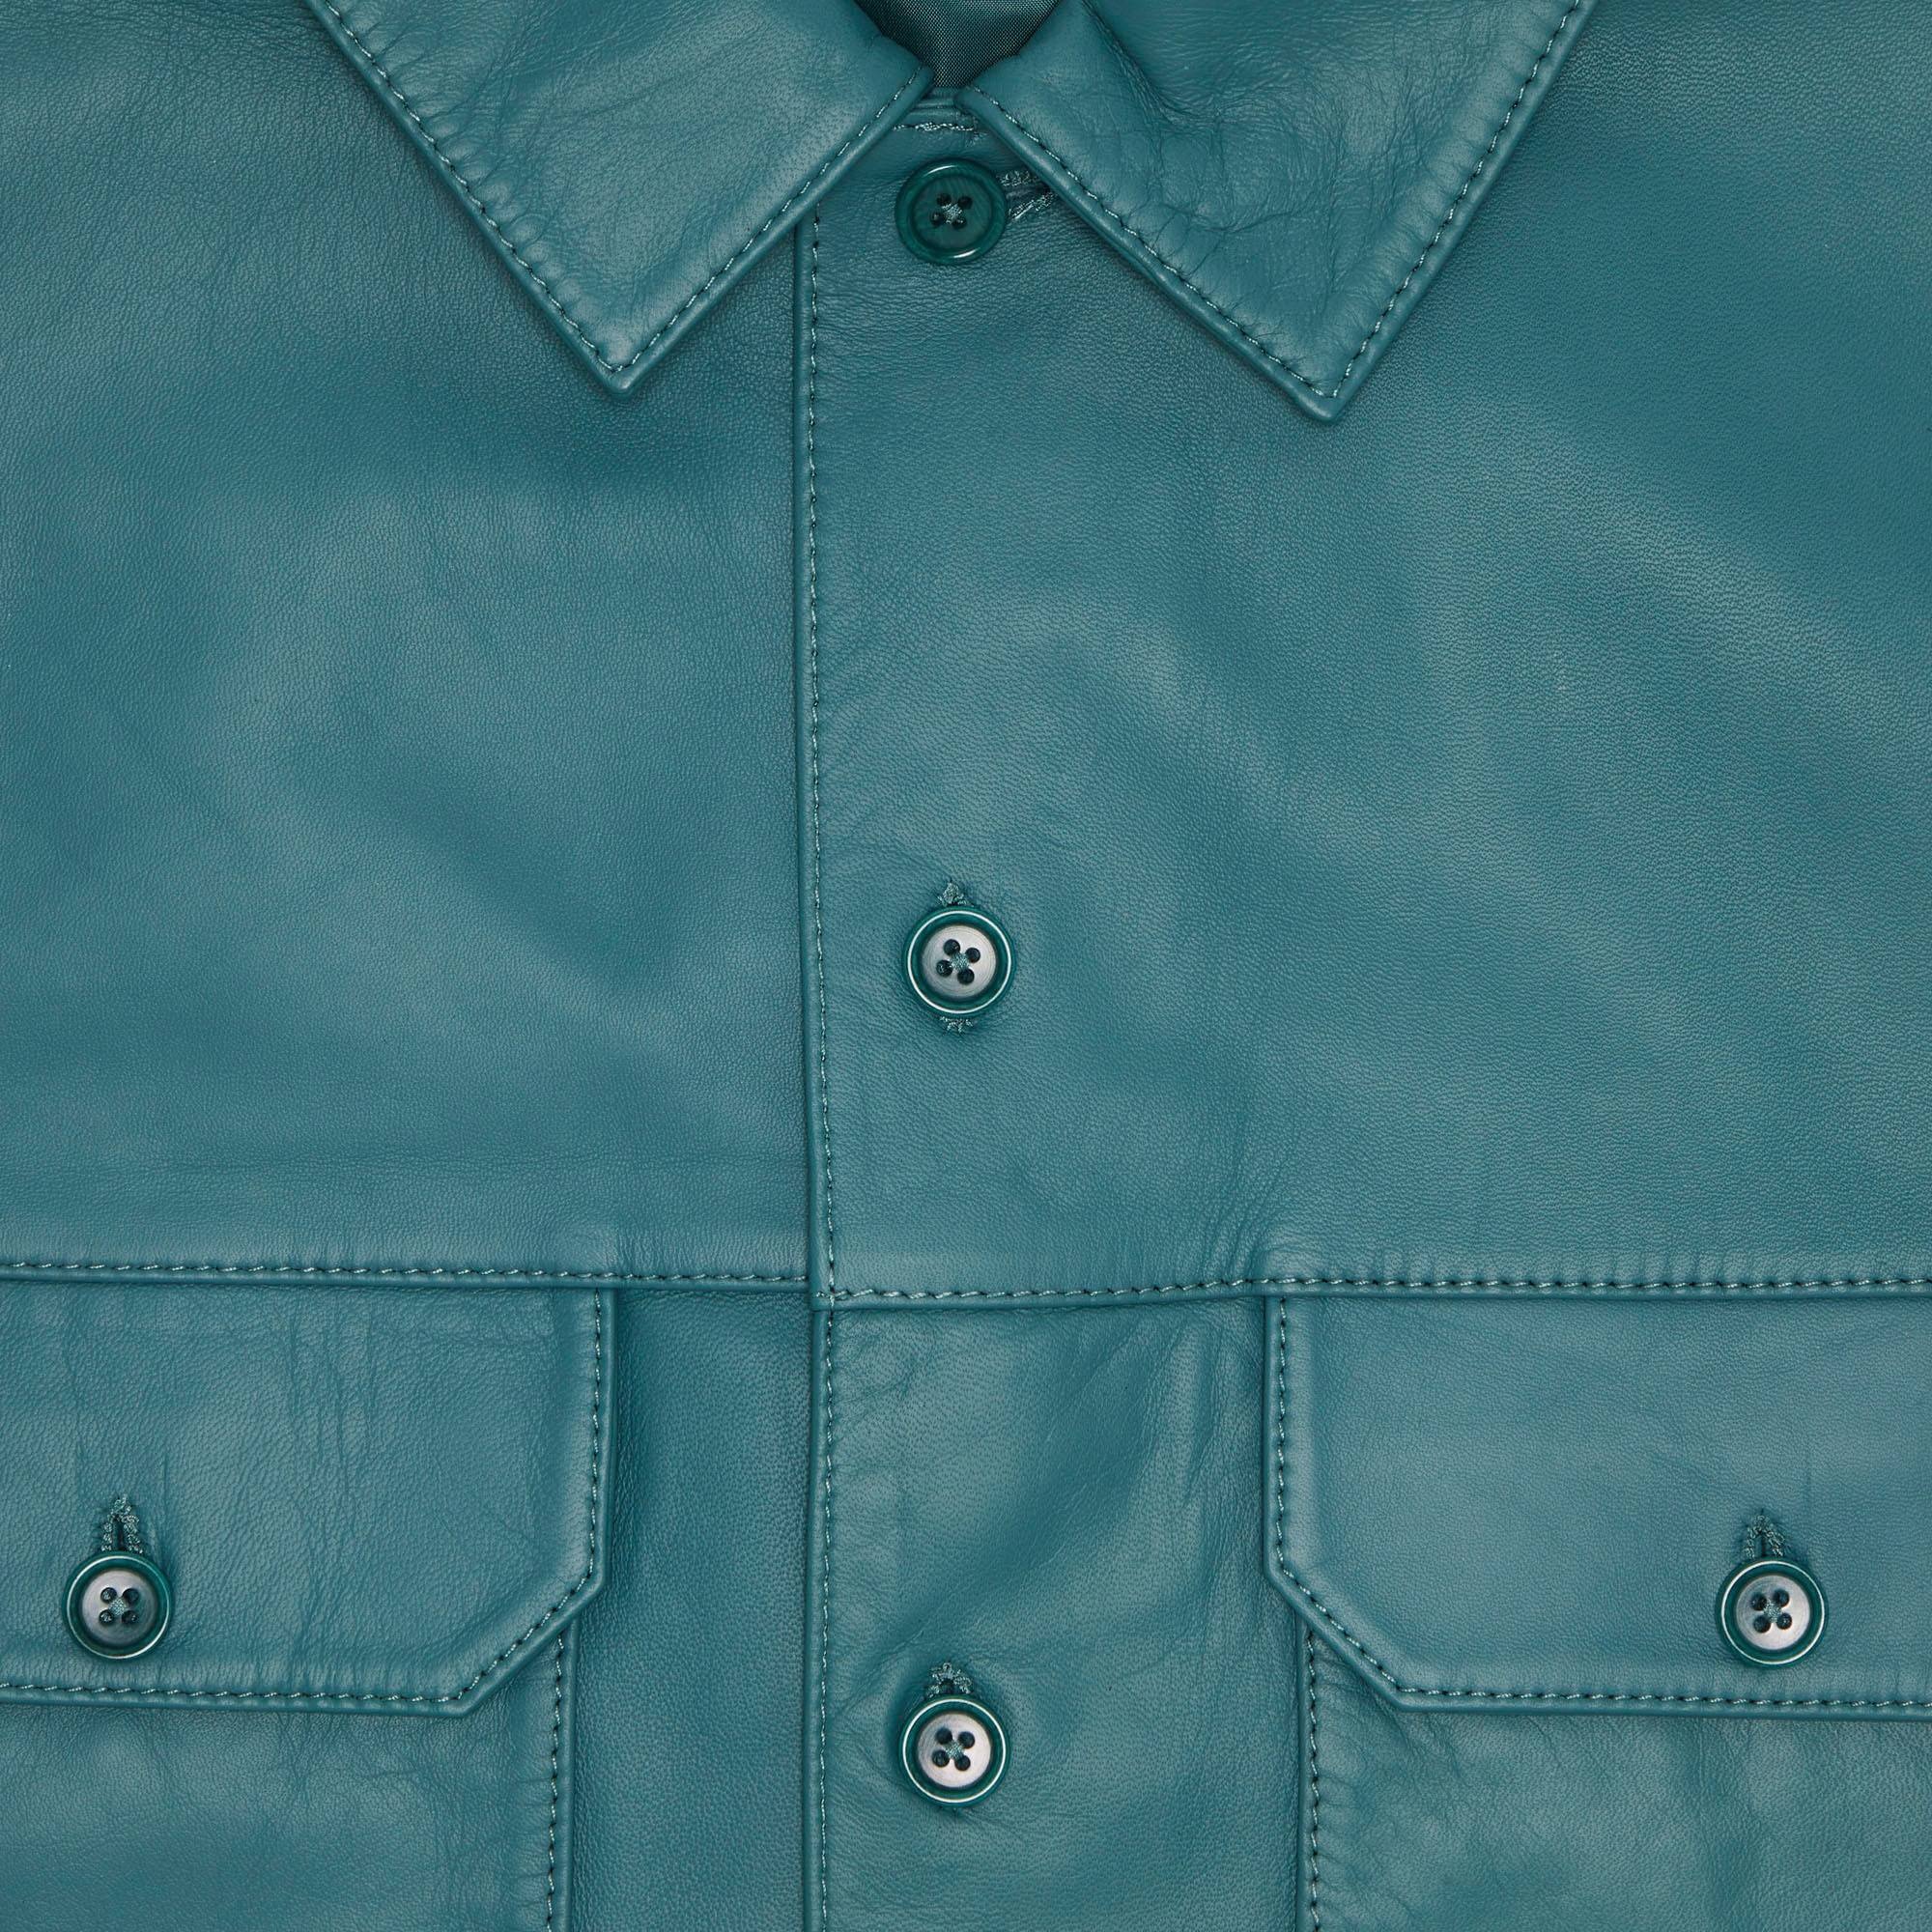 Supreme Short-Sleeve Leather Work Shirt 'Dusty Teal' - 3